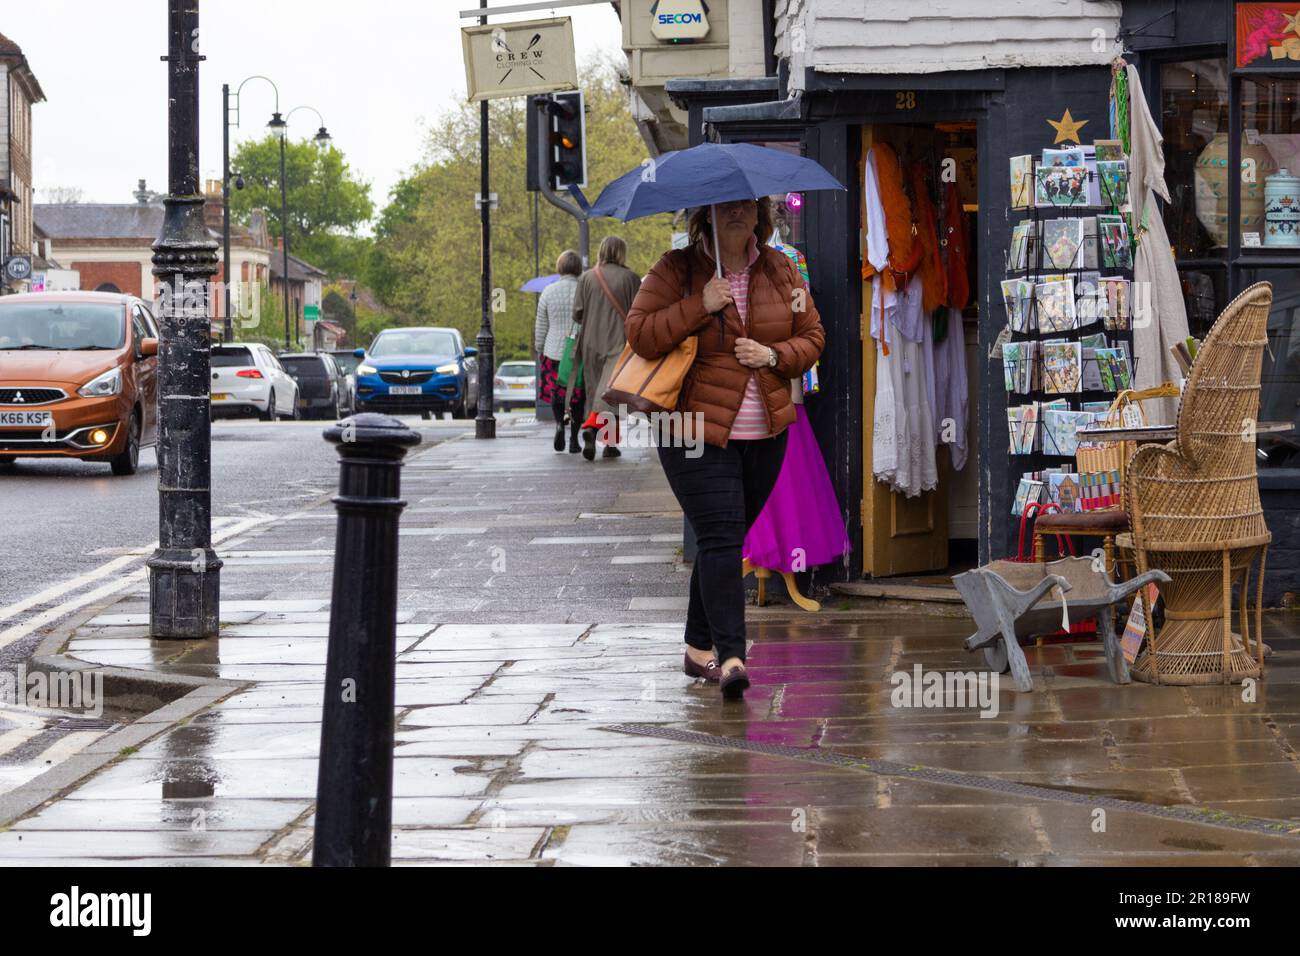 Tenterden, Kent, UK. 12th May, 2023. UK Weather: People shelter from the rain most with umbrellas in Tenterden town high street, Kent, UK. Photographer: Paul Lawrenson, Photo Credit: PAL News/Alamy Live News Stock Photo